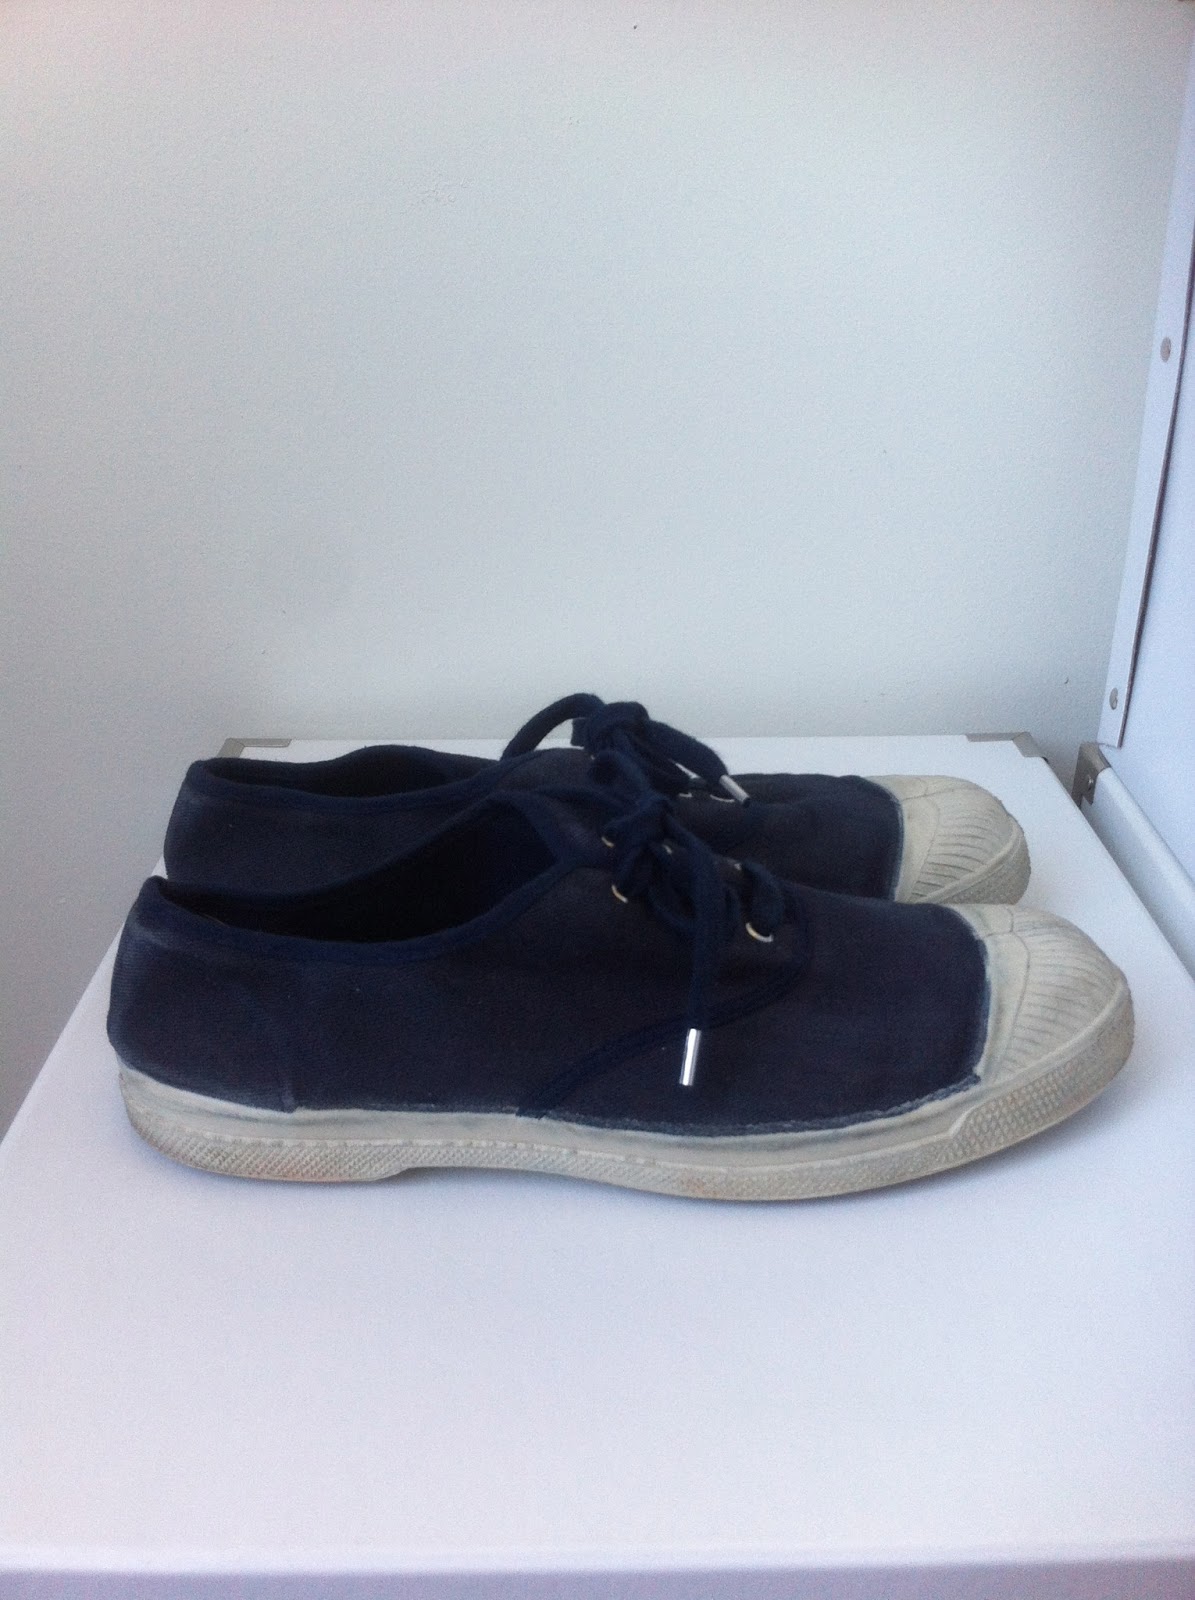 laws of general economy: Bensimon Vintage Washed Lace-Up Sneaker Size 38